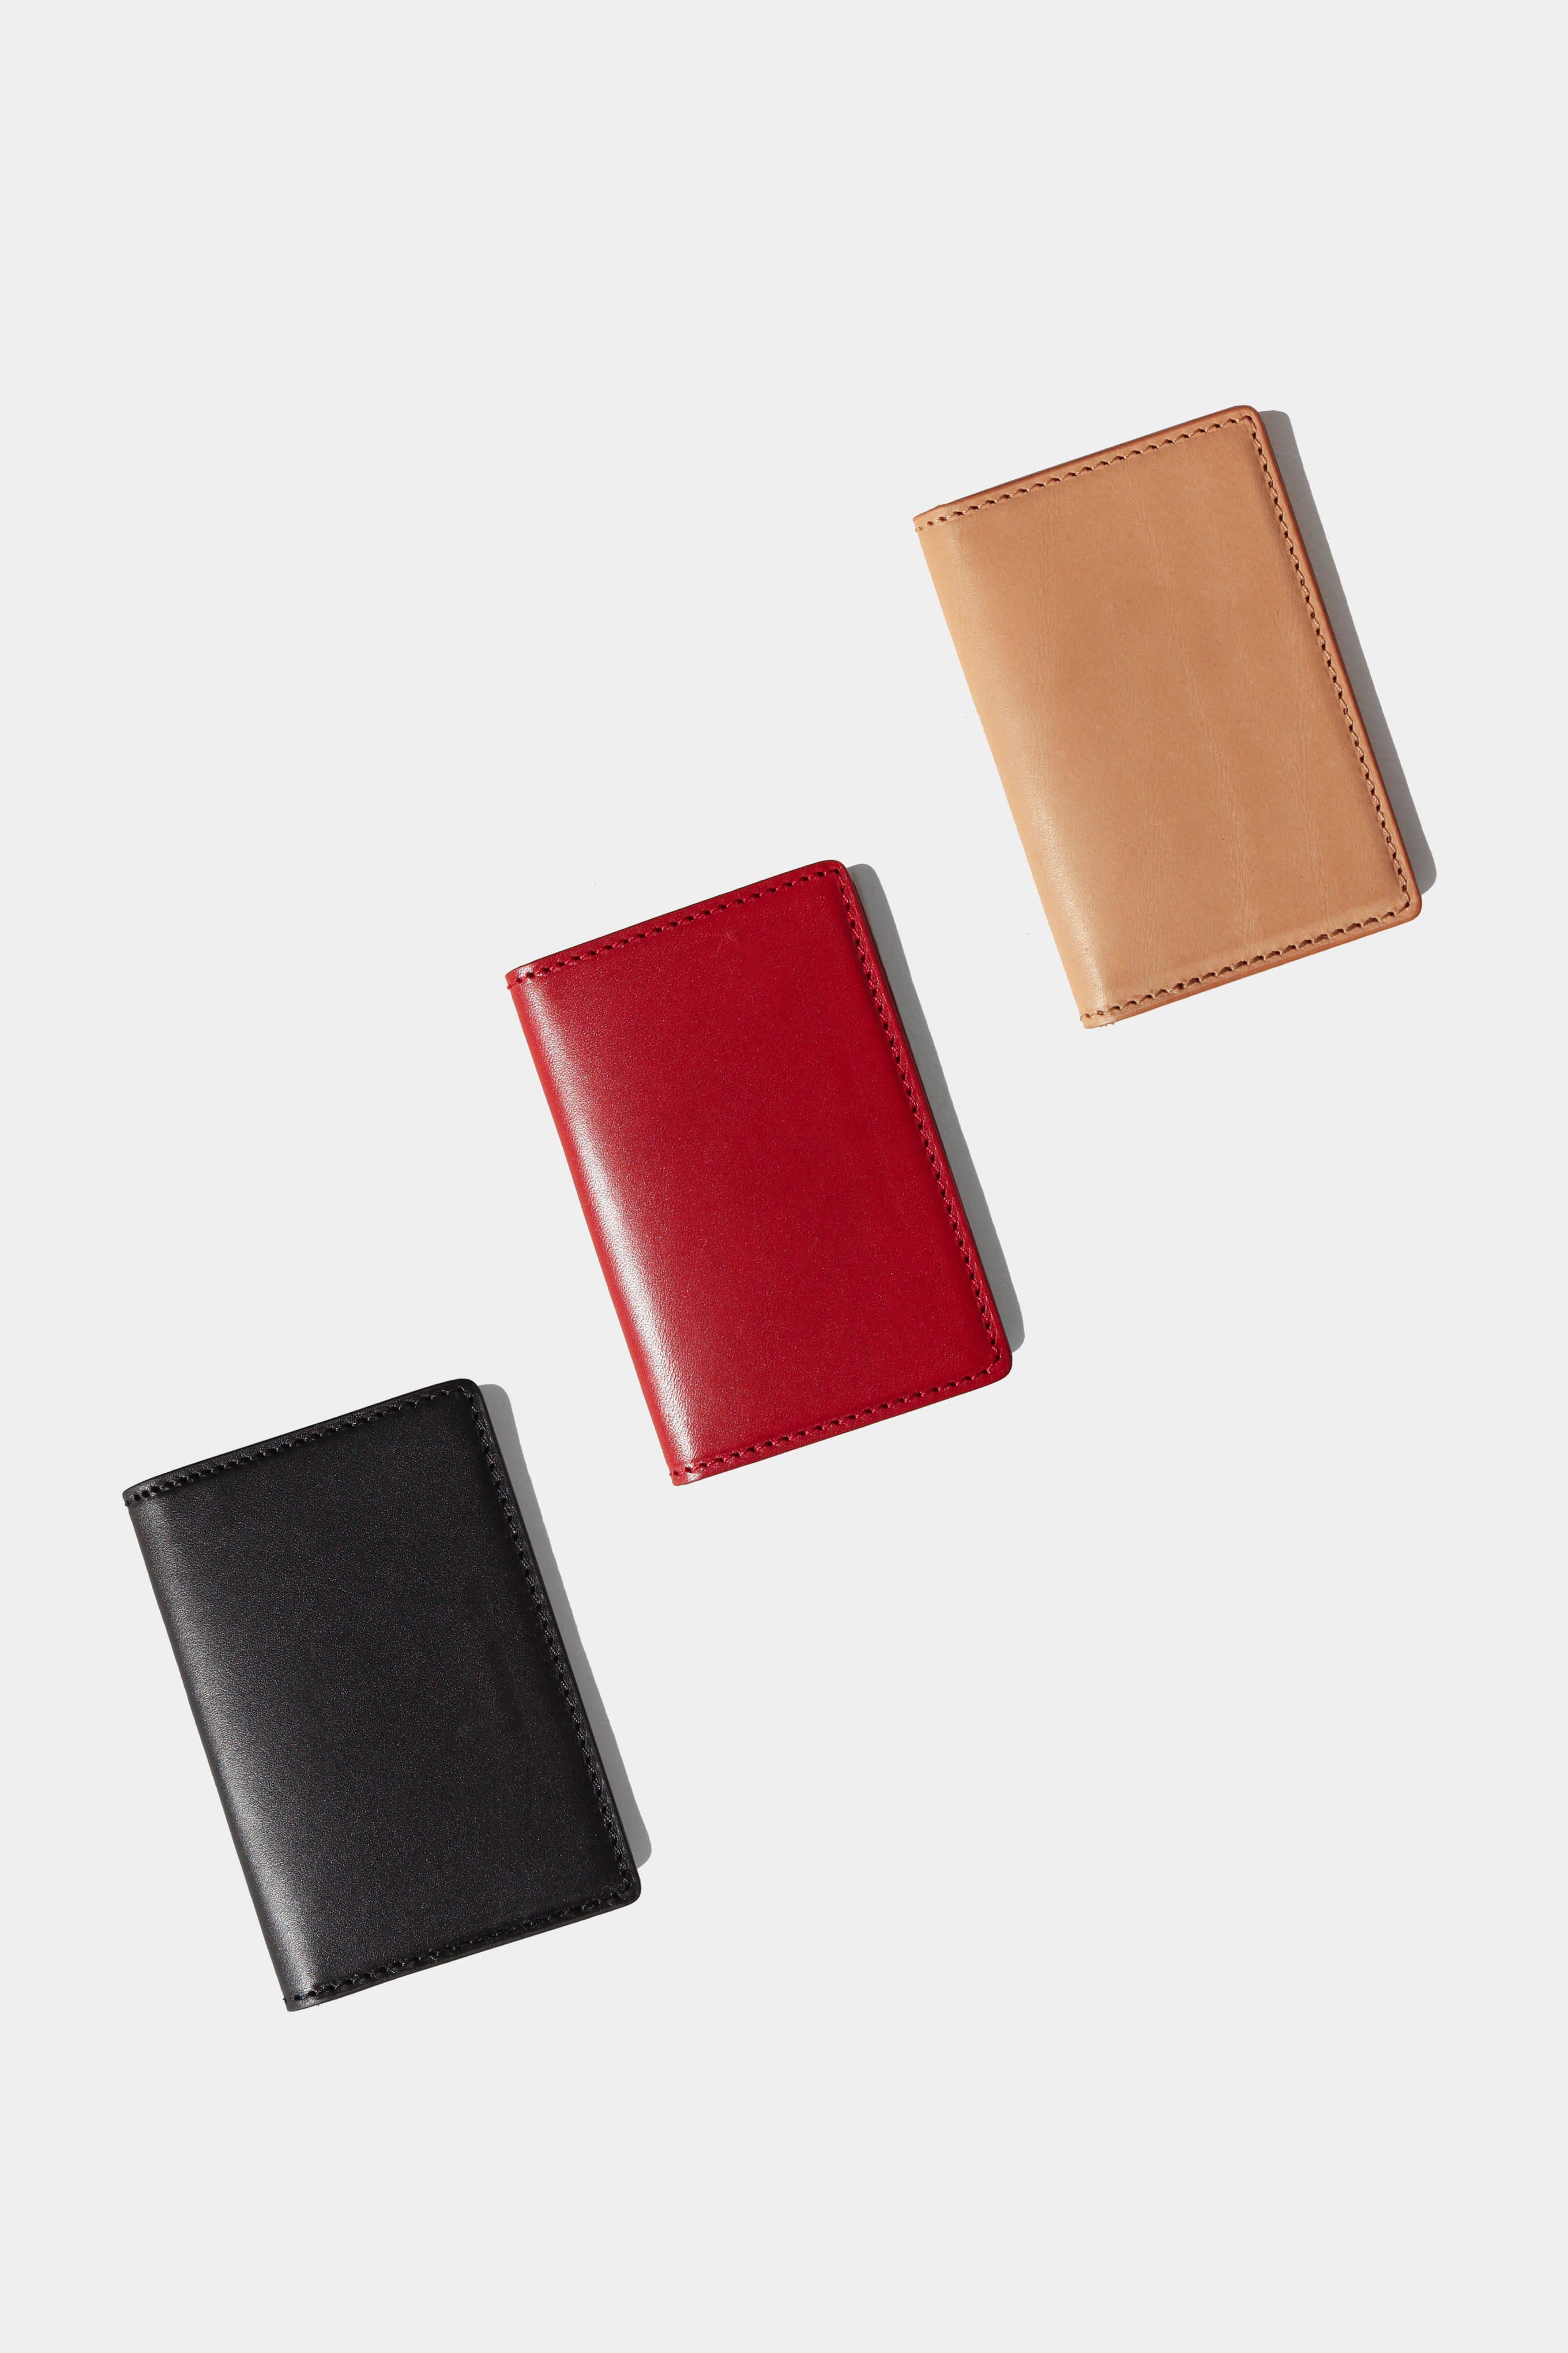 THE WARDROBE Vegetable Leather Folded Card Wallet